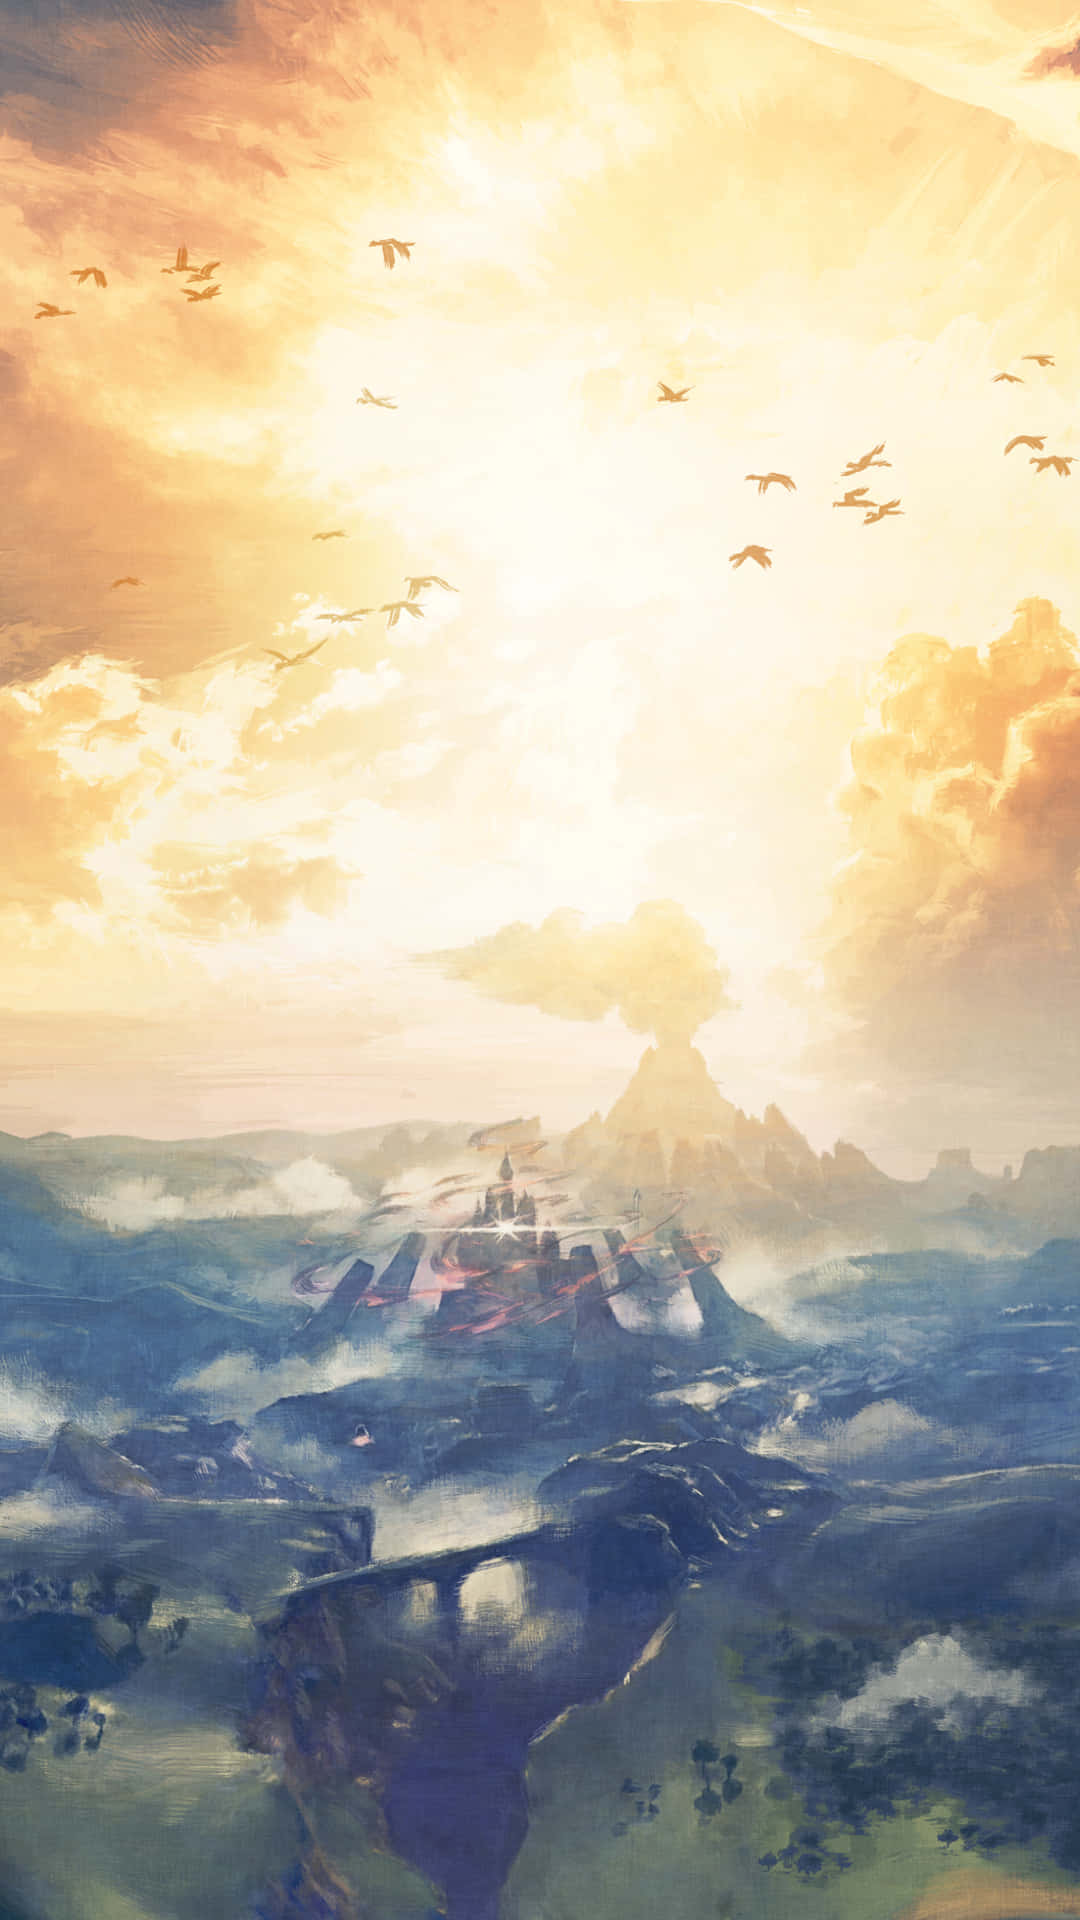 Unlock the secrets to The Legend Of Zelda world with your Iphone. Wallpaper